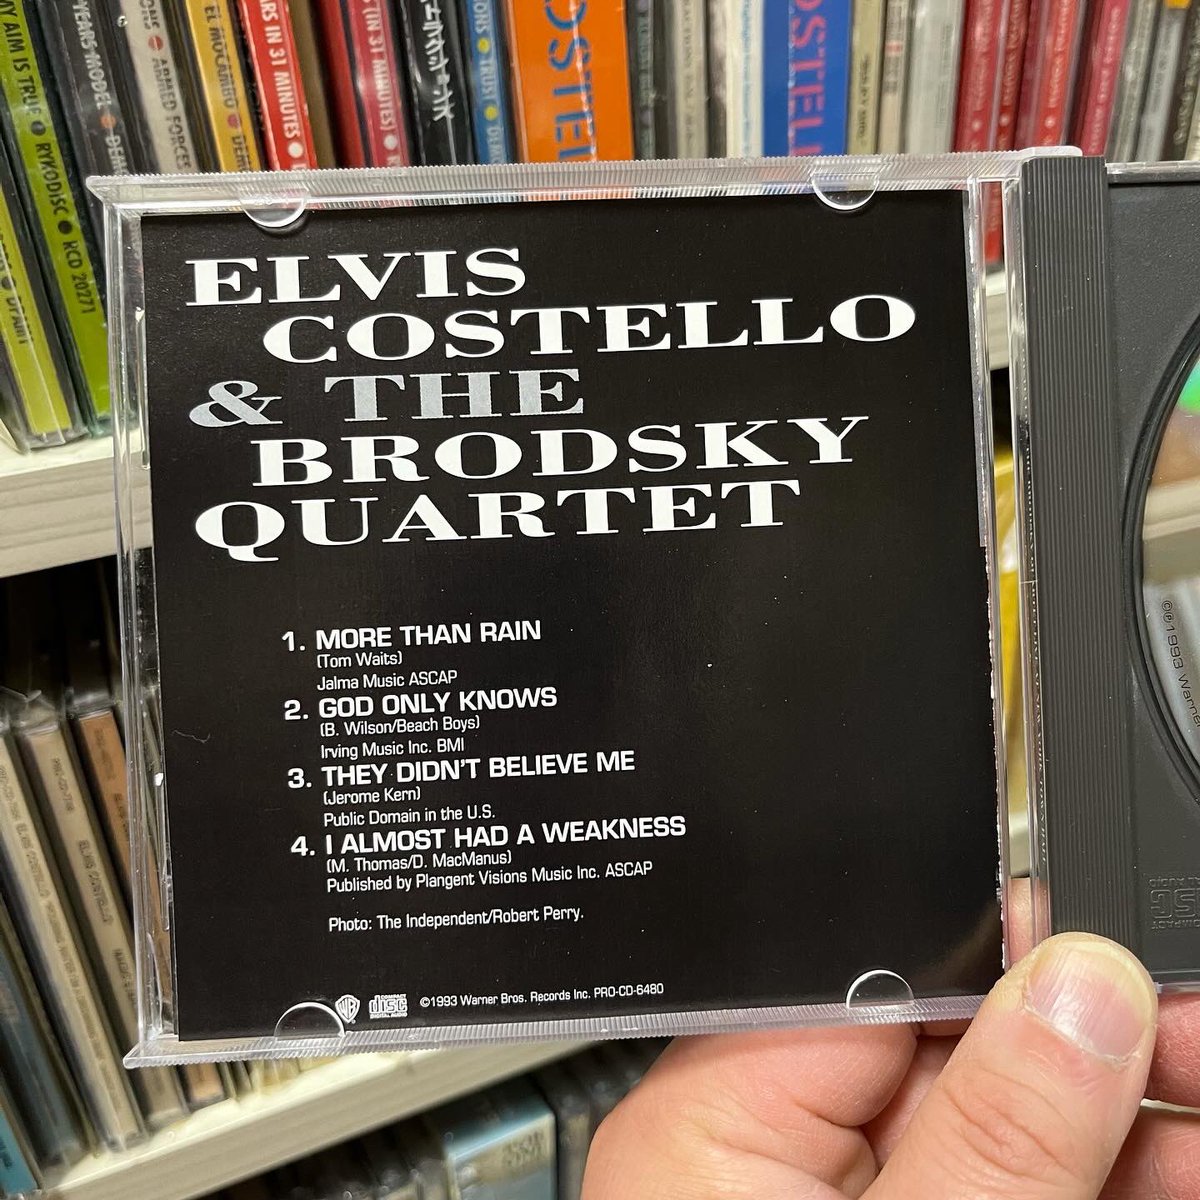 #NowPlaying 
Elvis Costello & The Brodsky Quartet - Live at New York Town Hall (1993) 
#ElvisCostello #BrodskyQuartet #TomWaits #BeachBoys